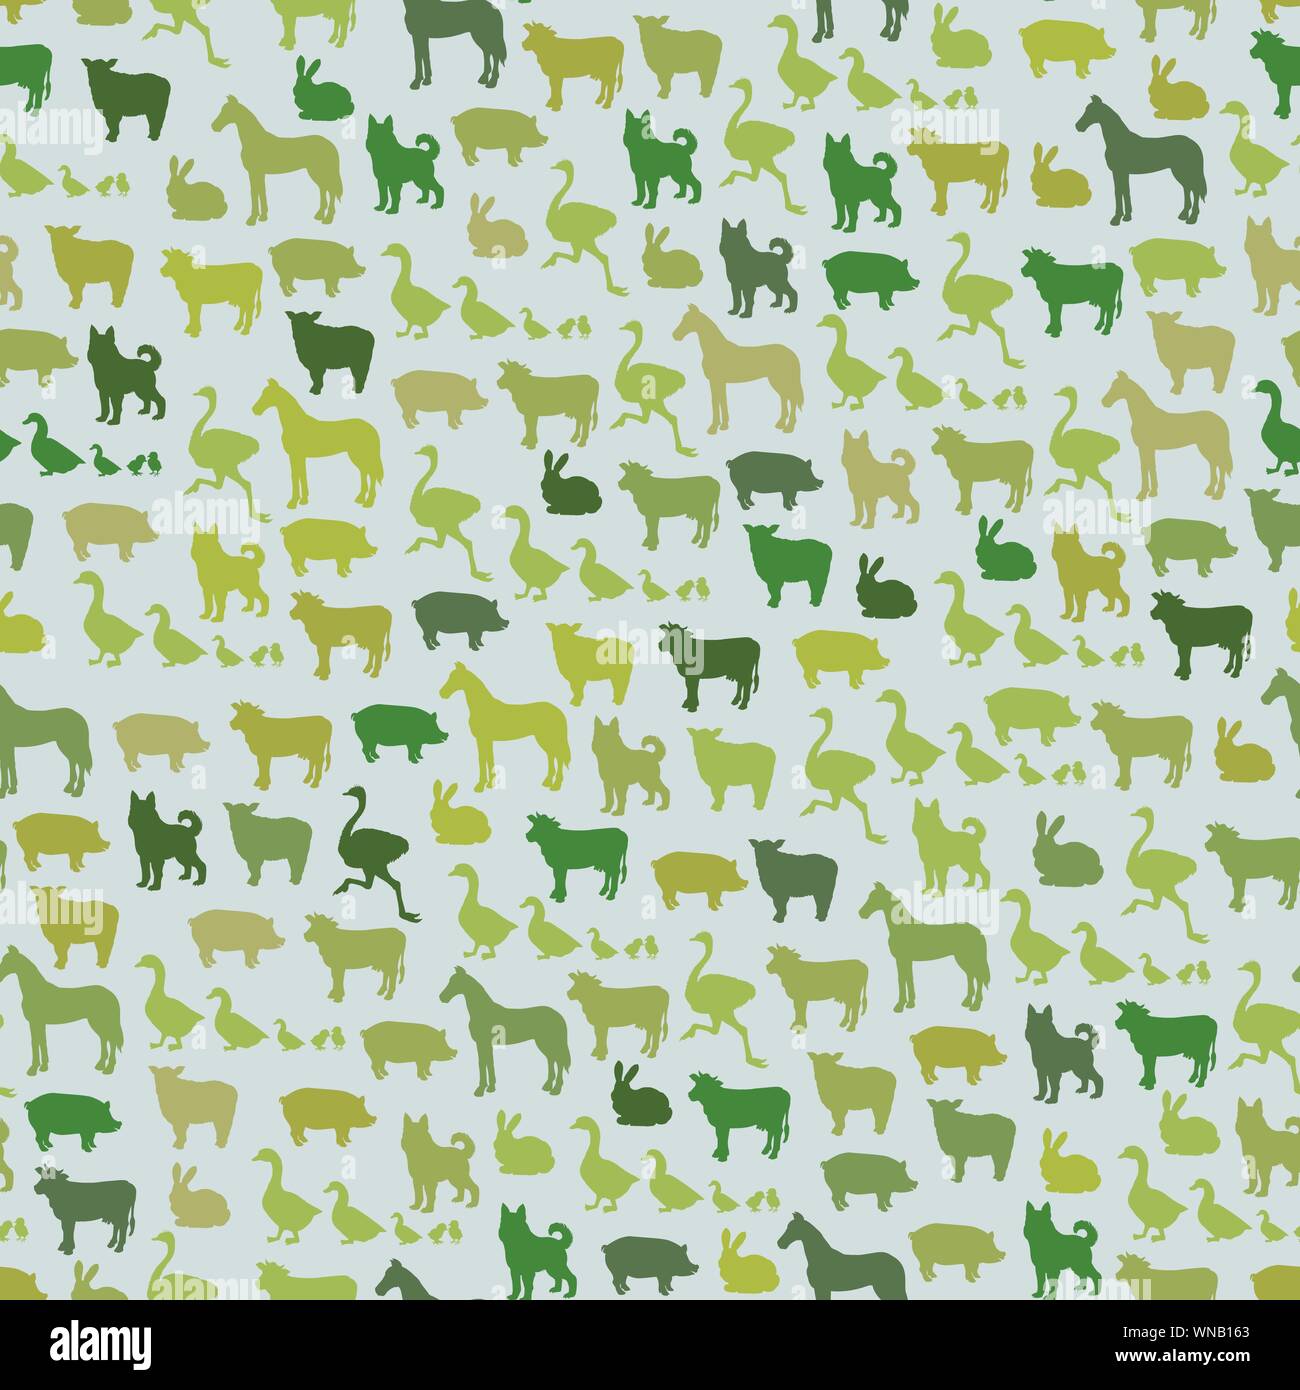 Farm animals silhouette seamless pattern. Zoo animals in cartoon style for food wrapping design. Cow, sheep, pig, horse,ostrich, guard dog, duck, rabbit, goose and pork Stock Vector